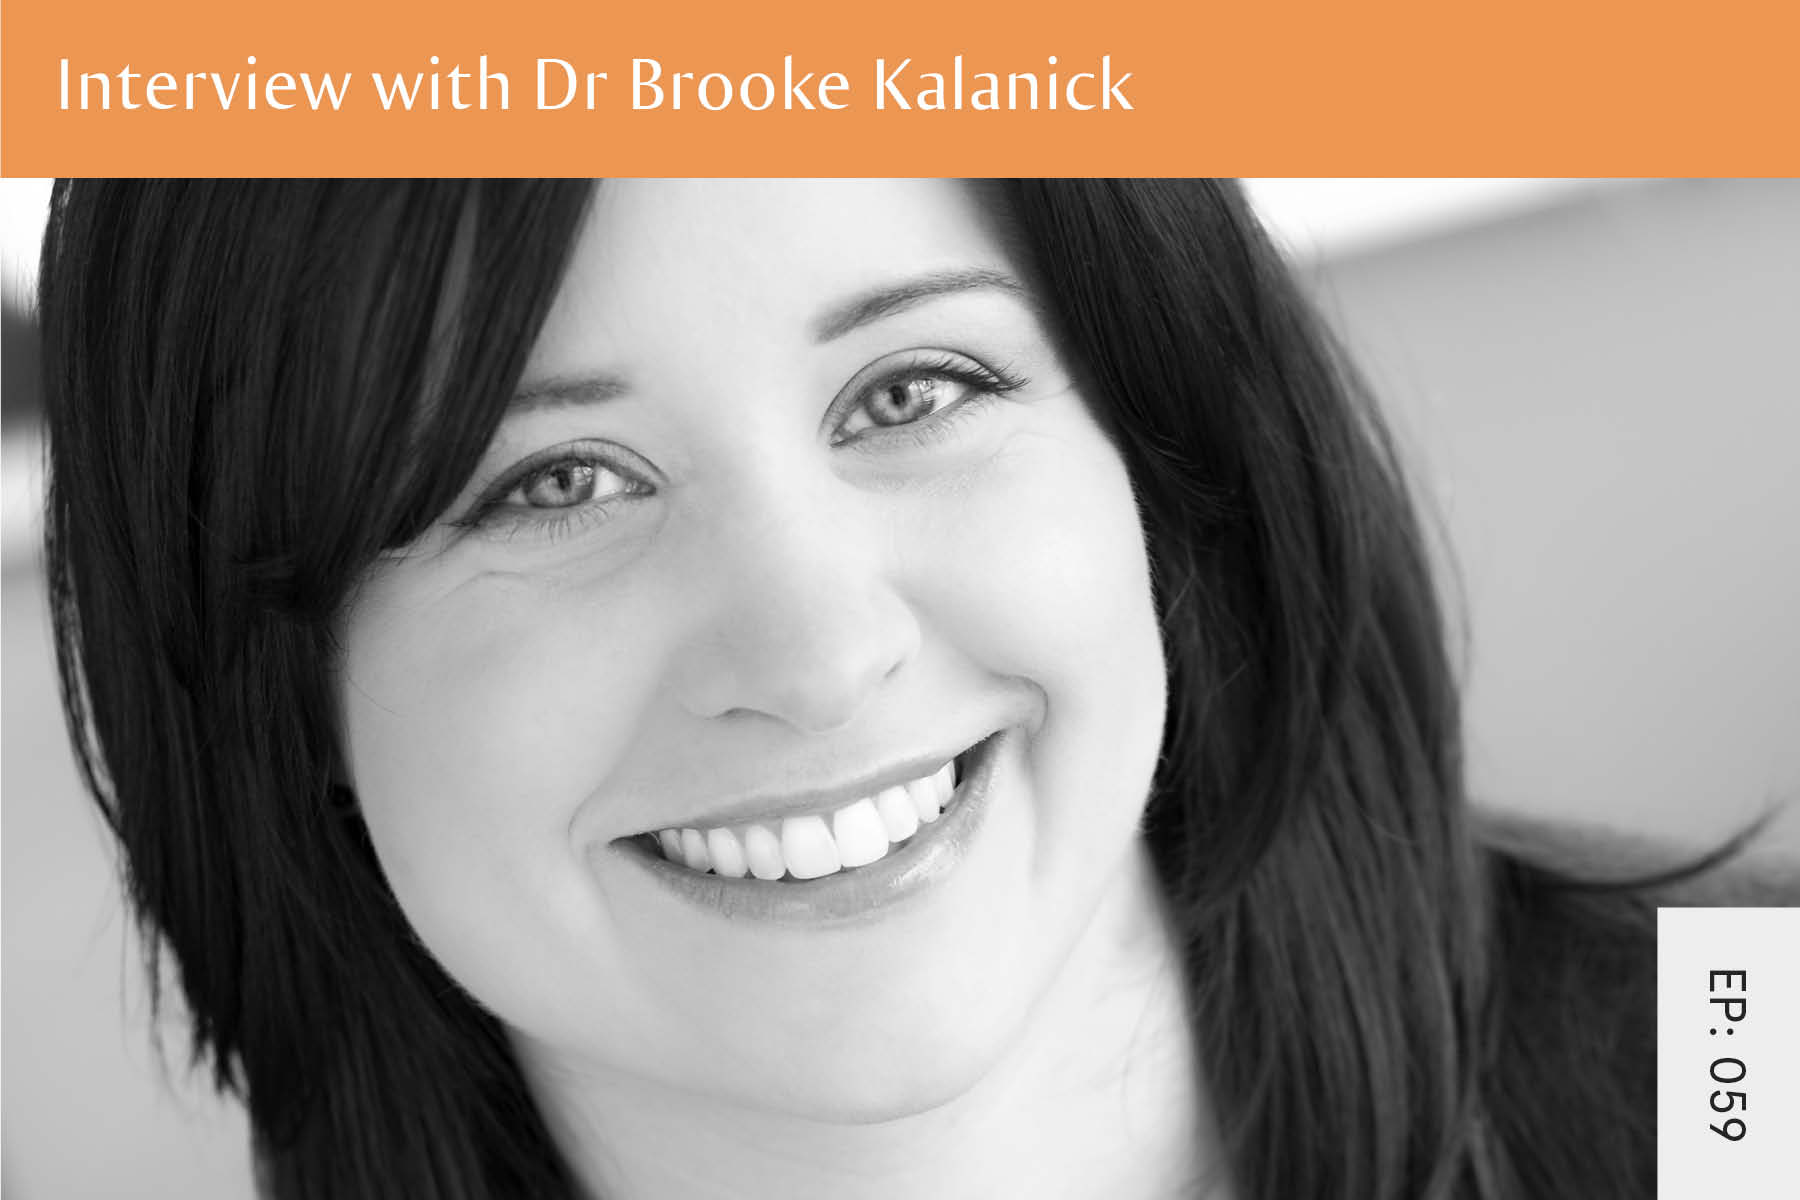 059: Interview with Dr Brooke Kalanick - Seven Health: Eating Disorder Recovery and Anti Diet Nutritionist